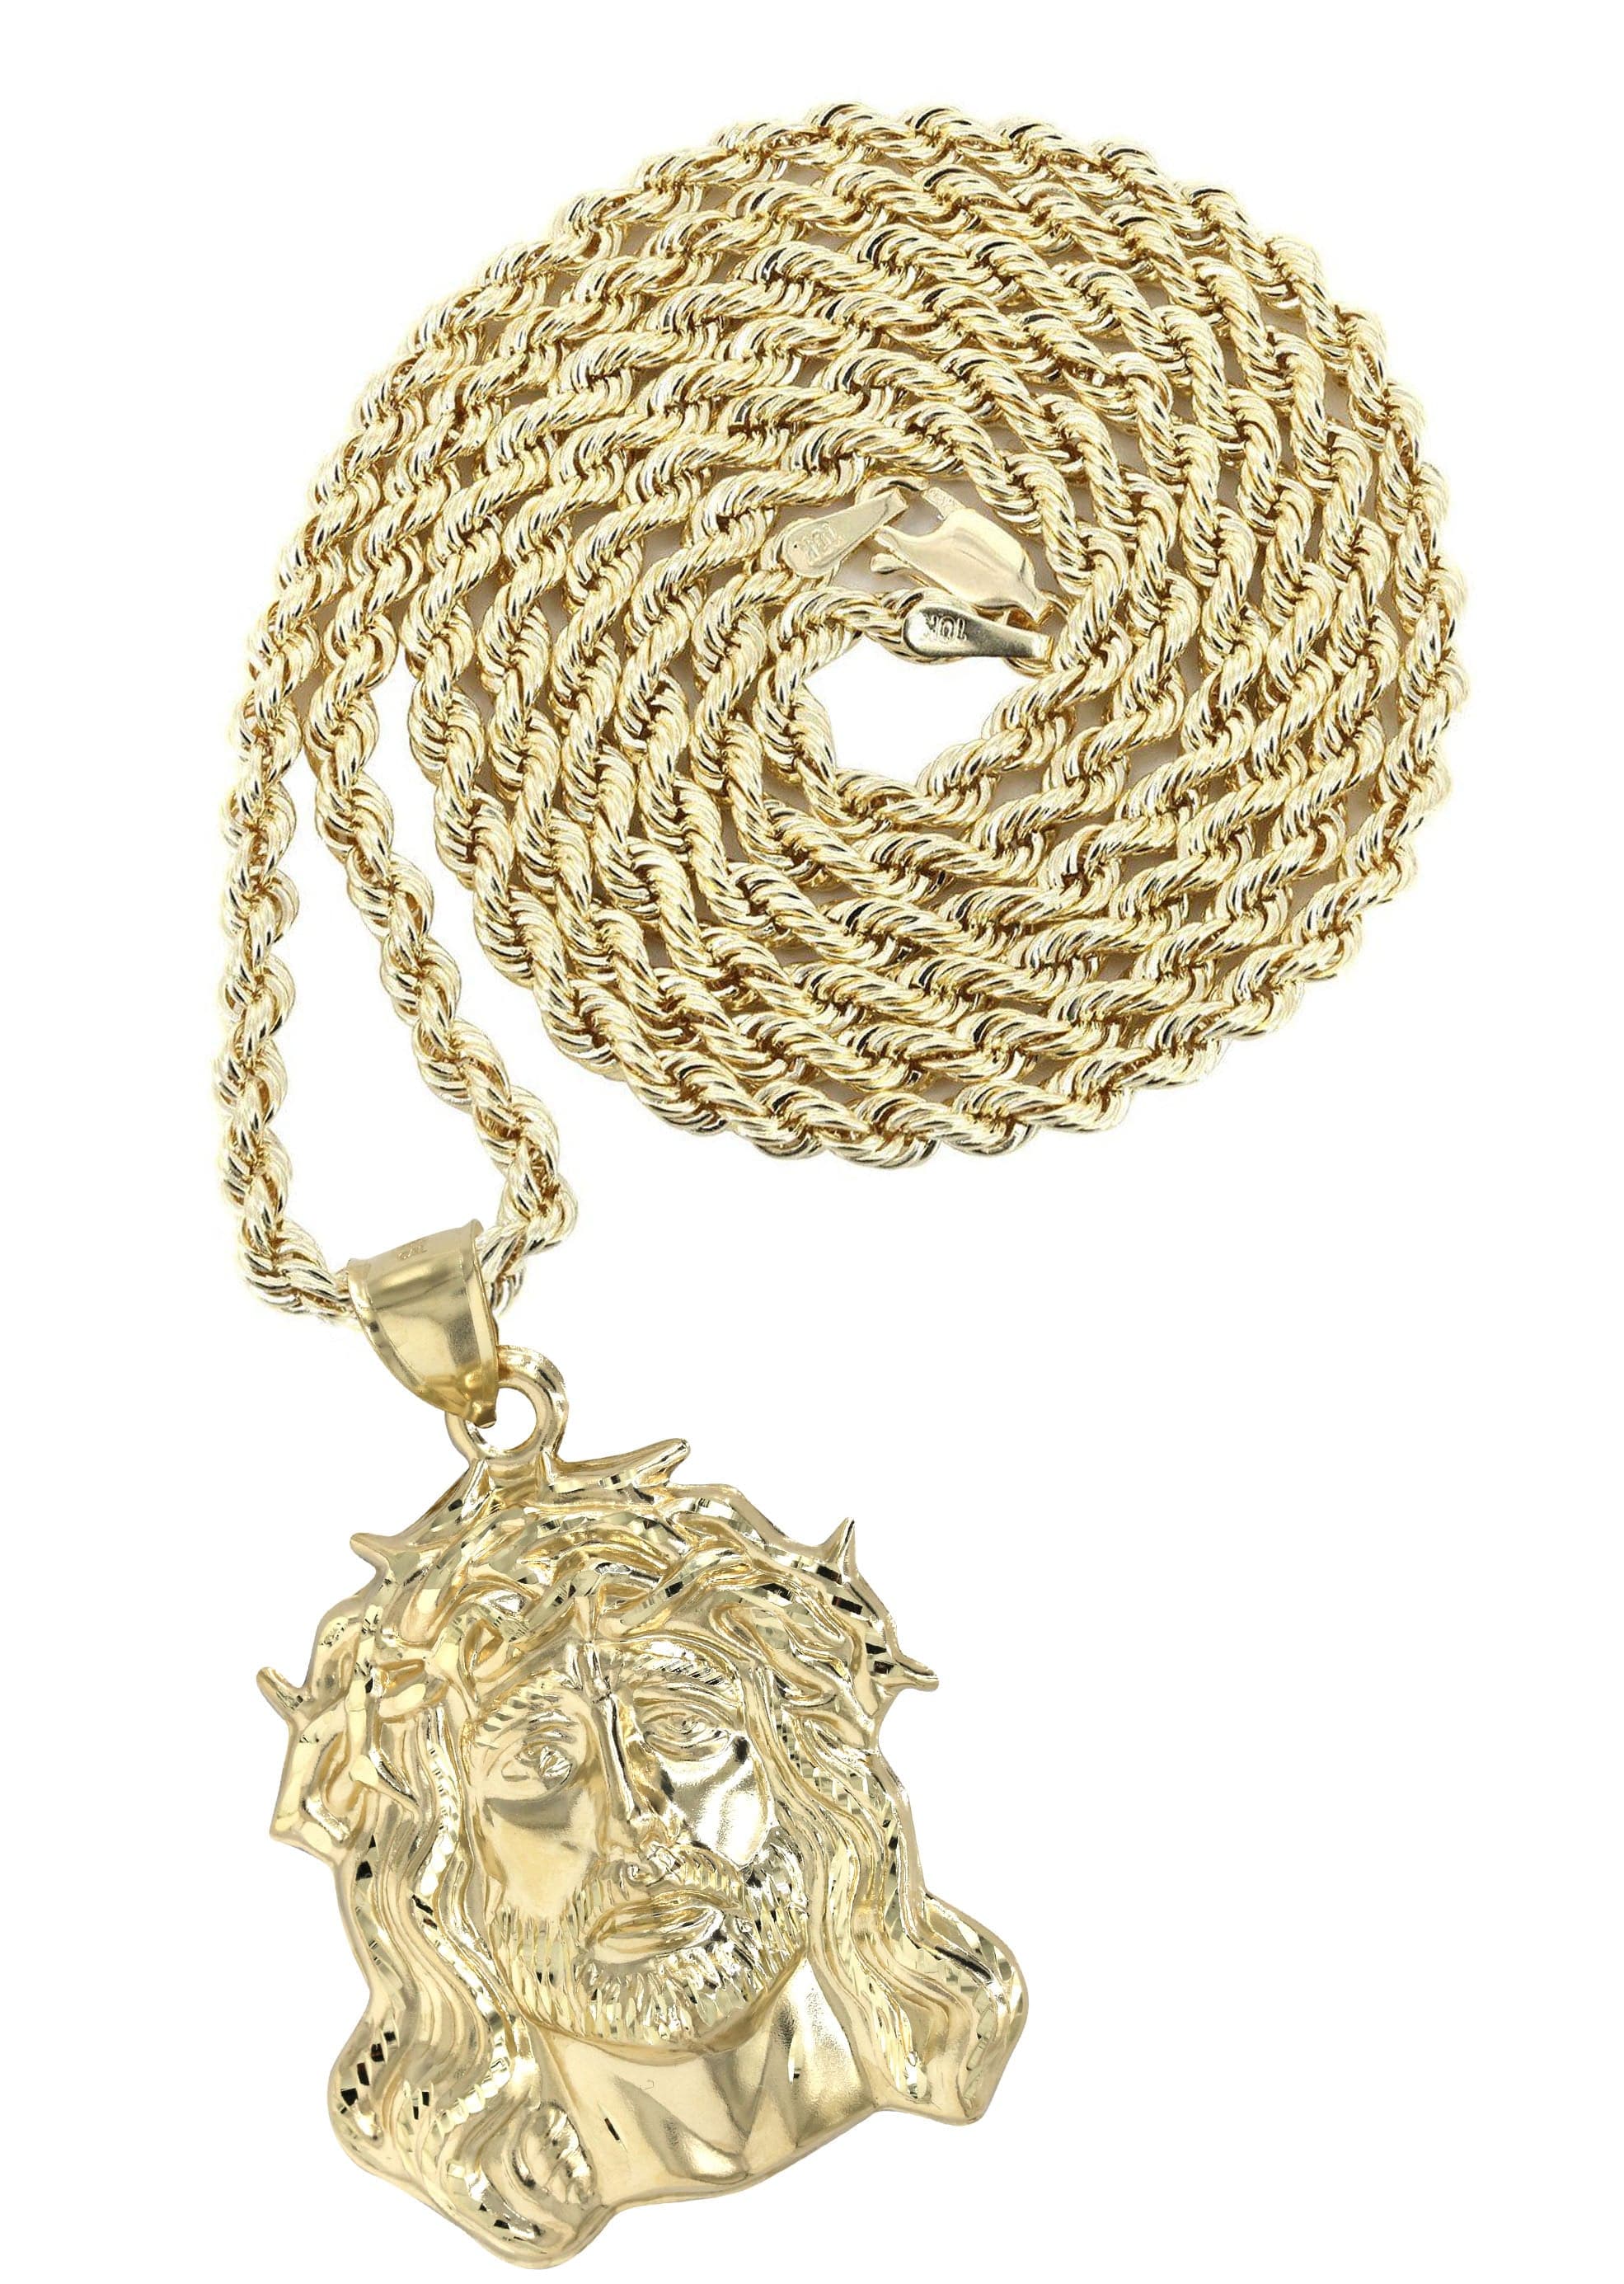 10K Yellow Gold Rope Chain & Jesus Head Pendant | Appx. 19 Grams – FrostNYC